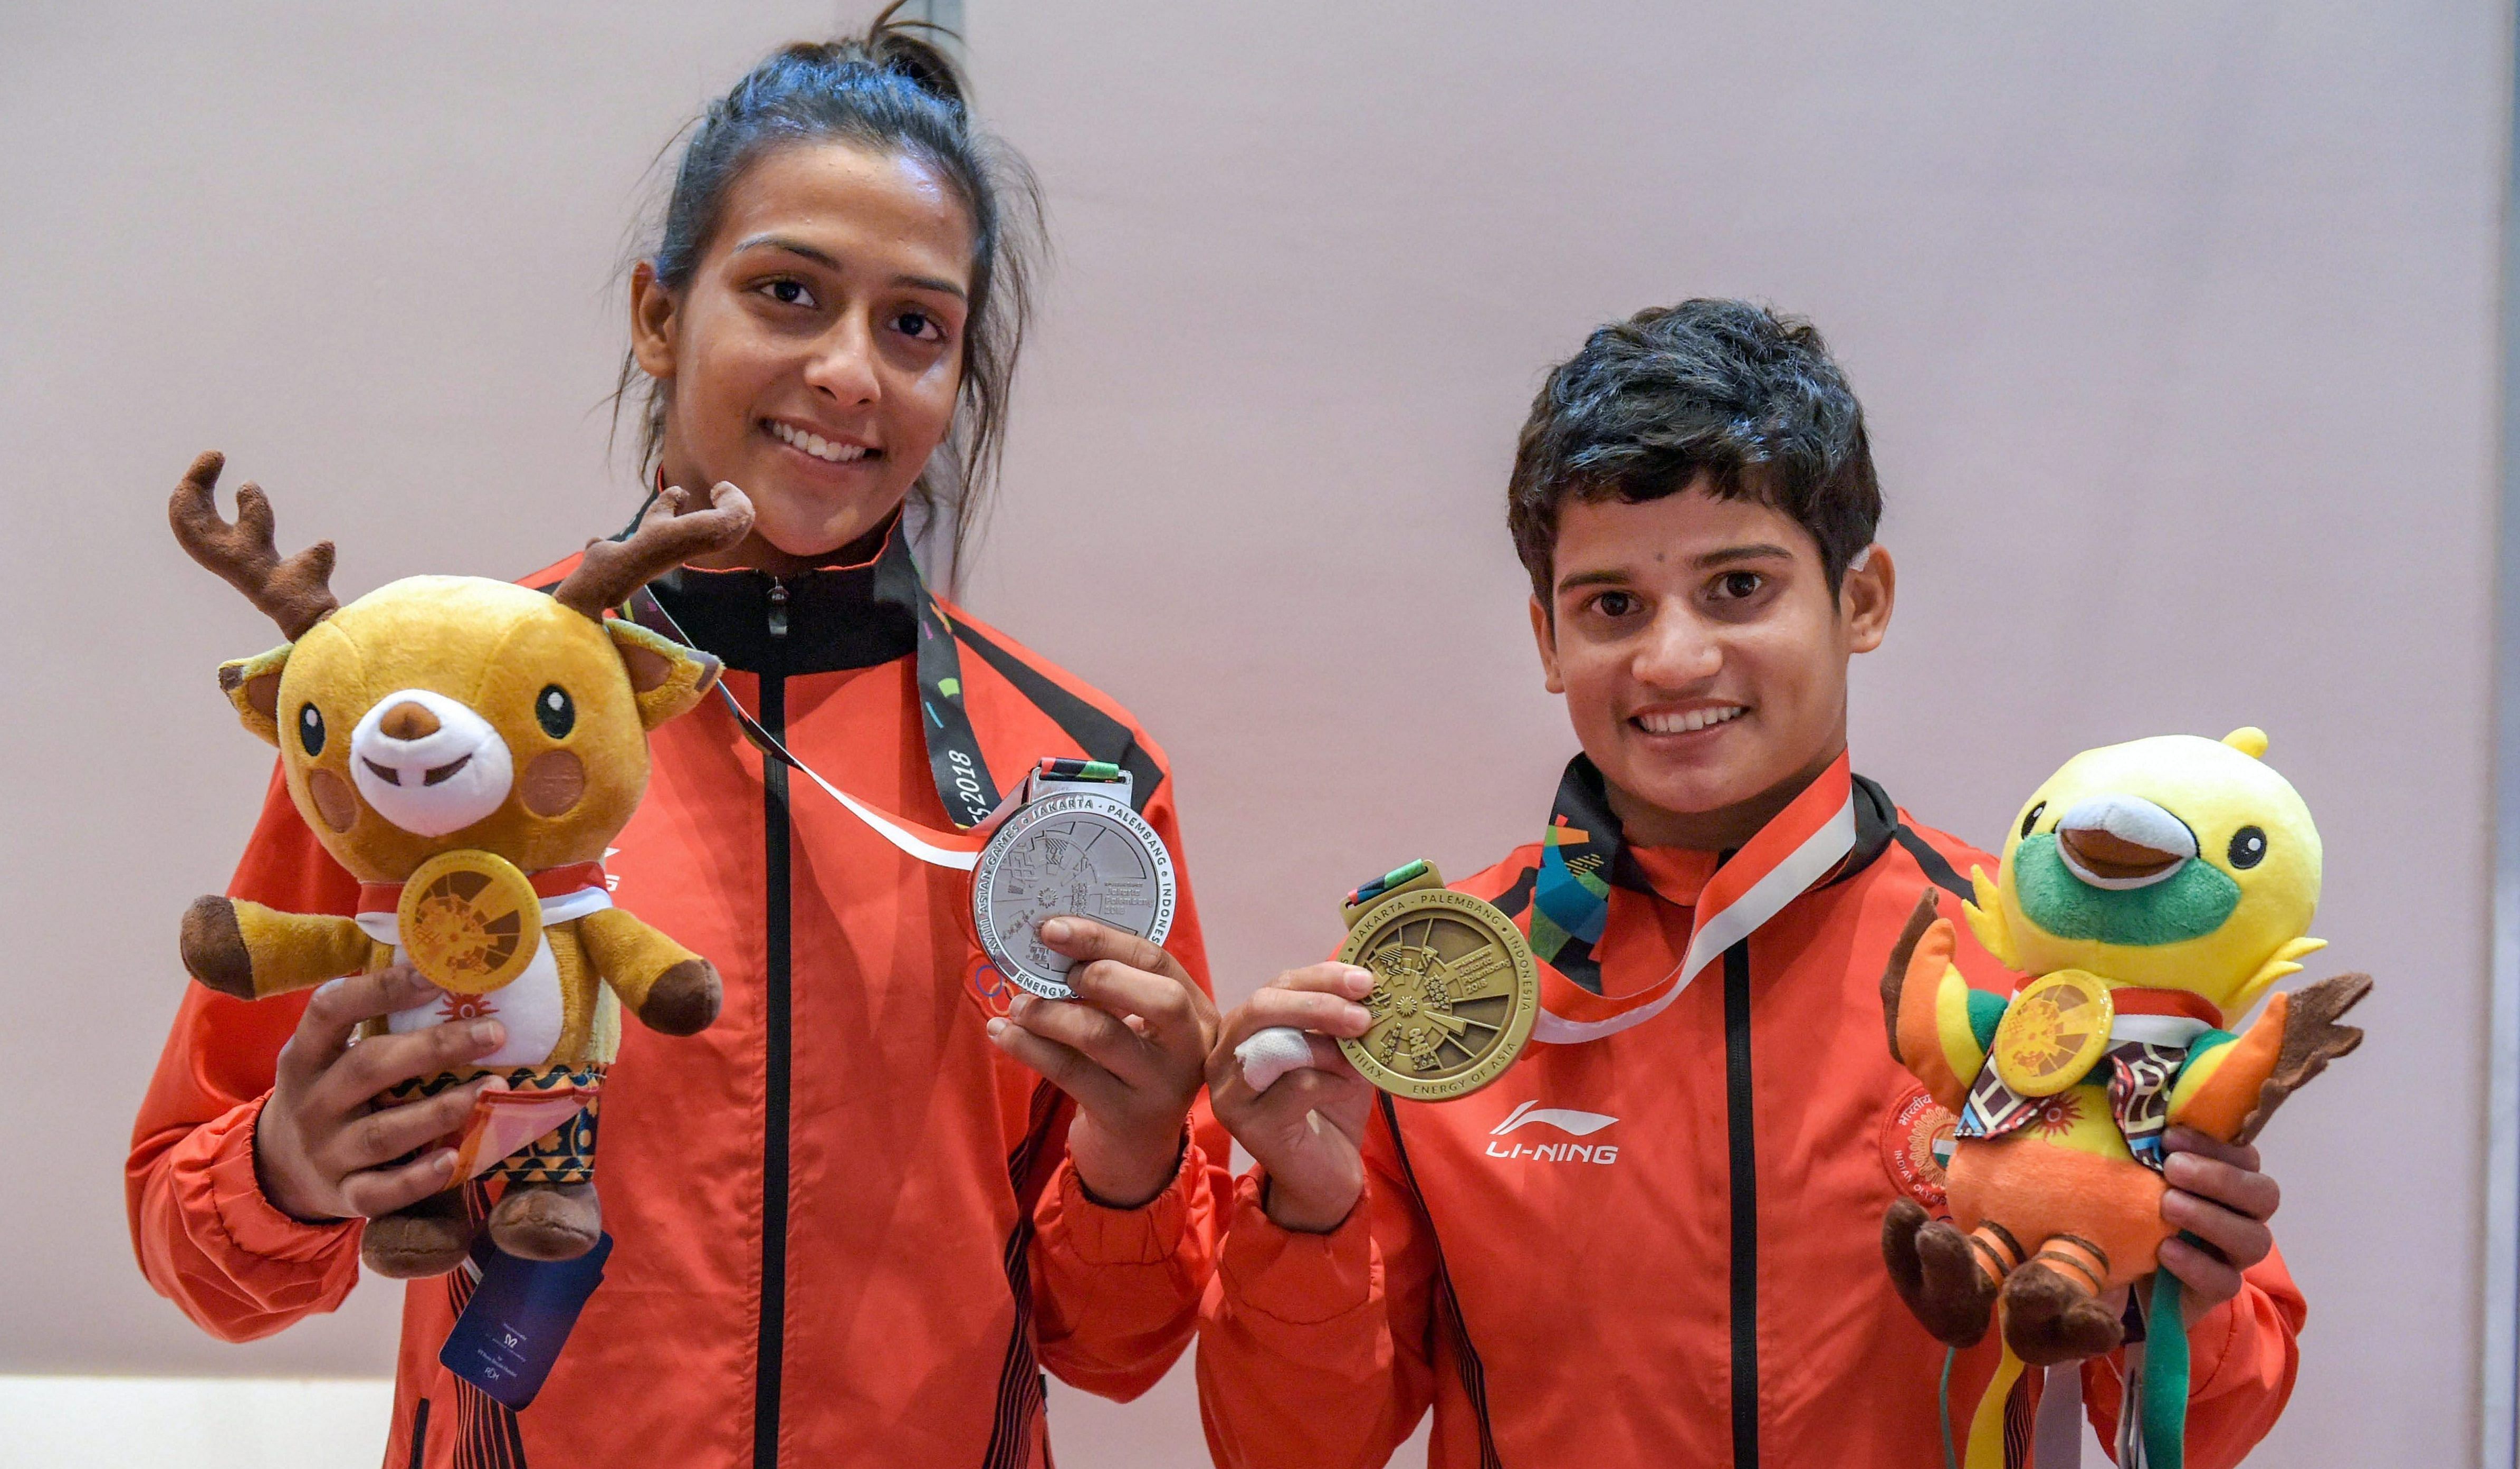 Indians have won six Asiad medals for wushu and kurash. But what are they?